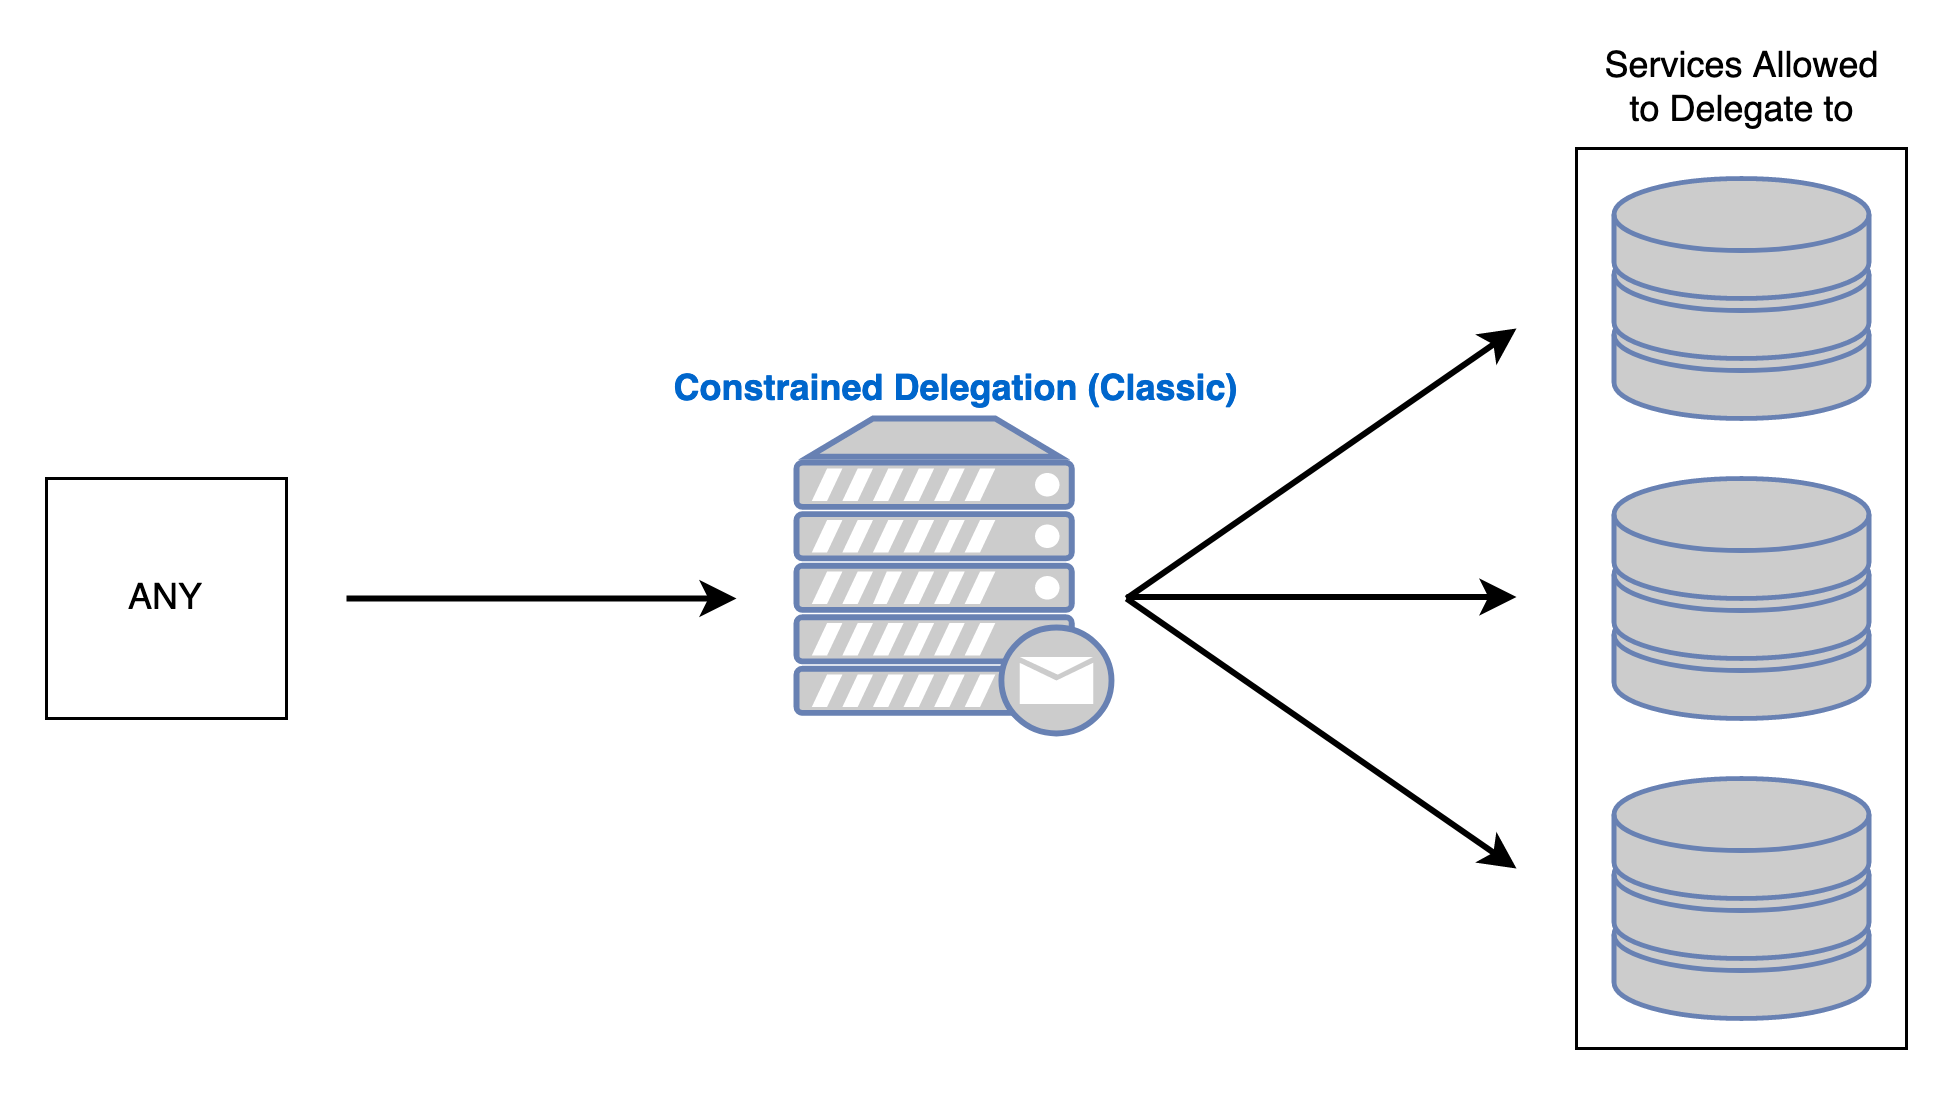 Diagram showing limitations placed on services allowed to delegate to for Constrained Delegation